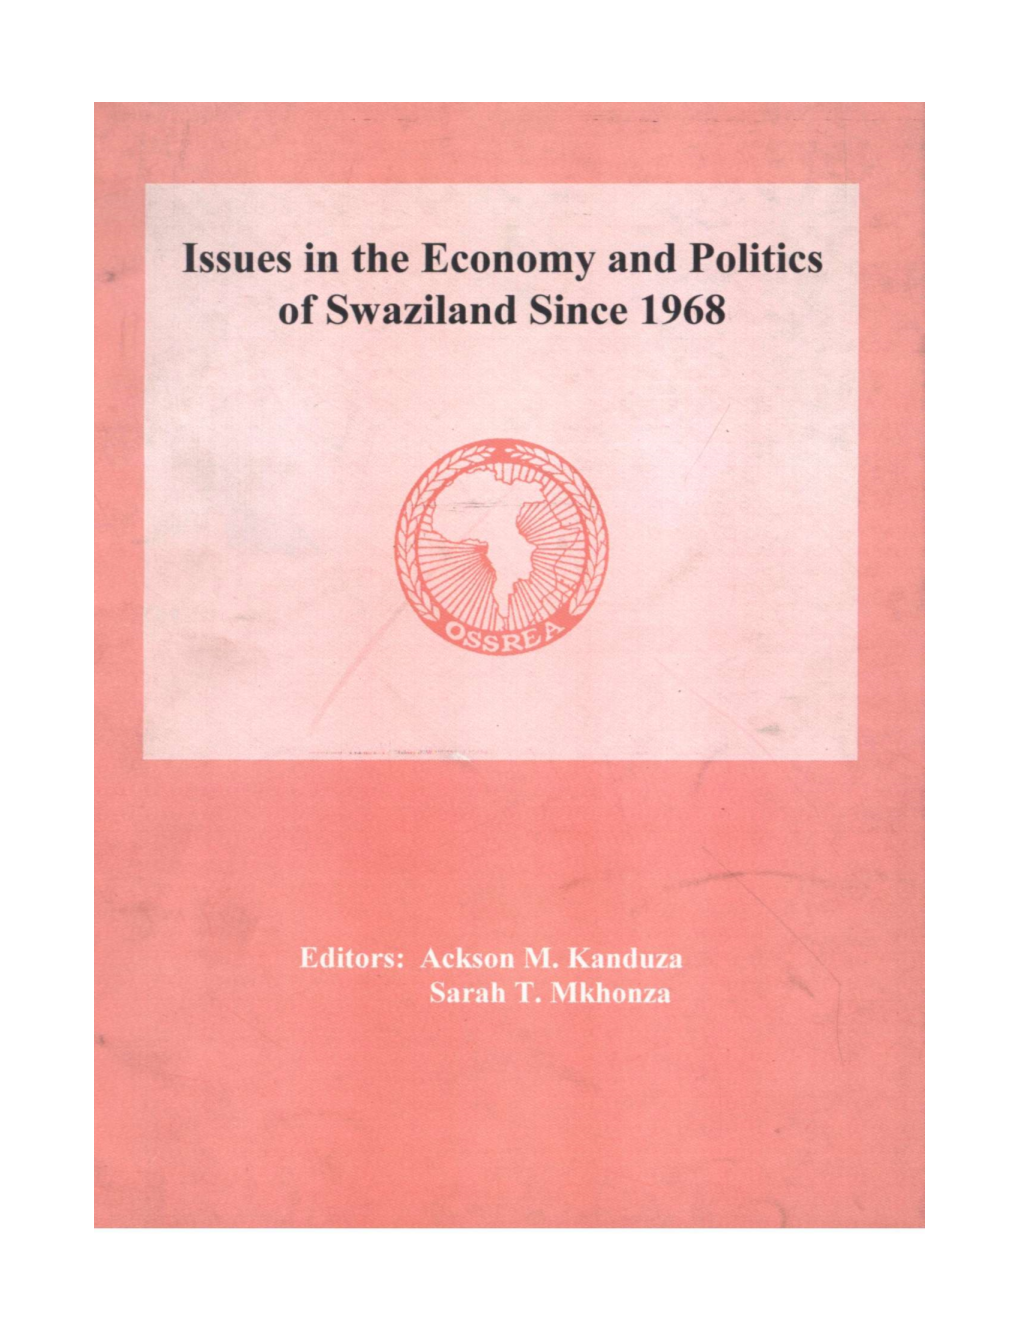 Issues in the Economy and Politics of Swaziland Since 1968